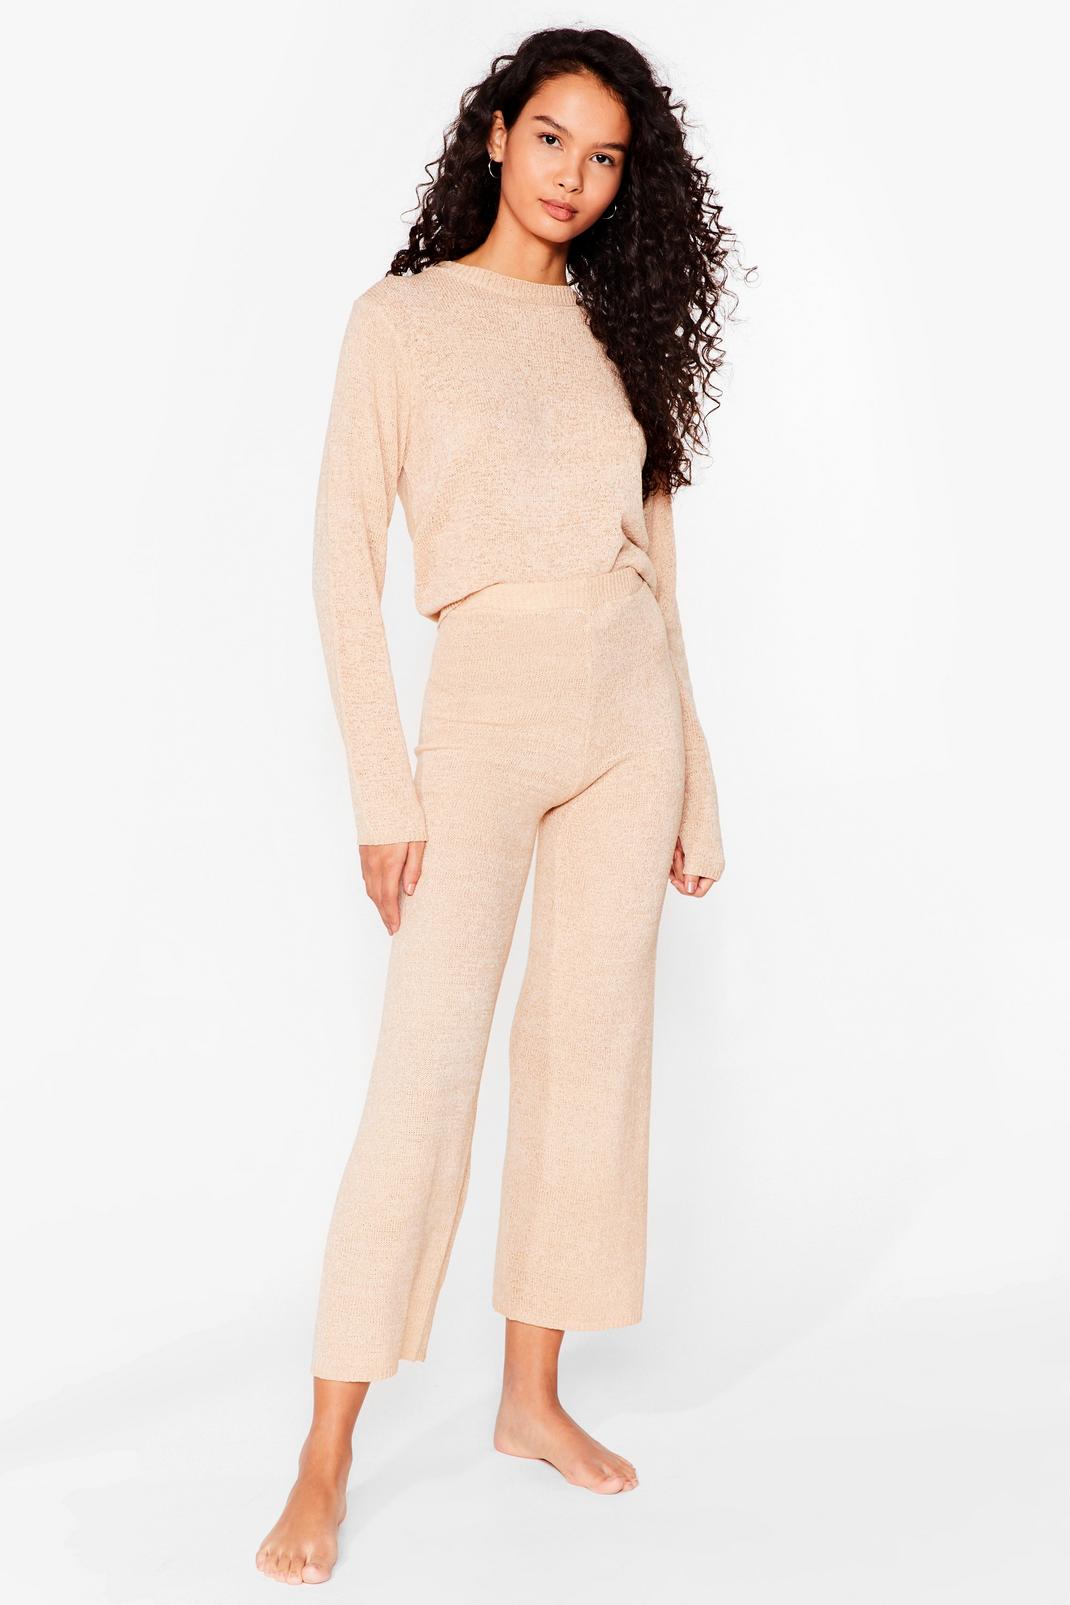 Oatmeal Knit Jumper and Culottes Loungewear Set image number 1